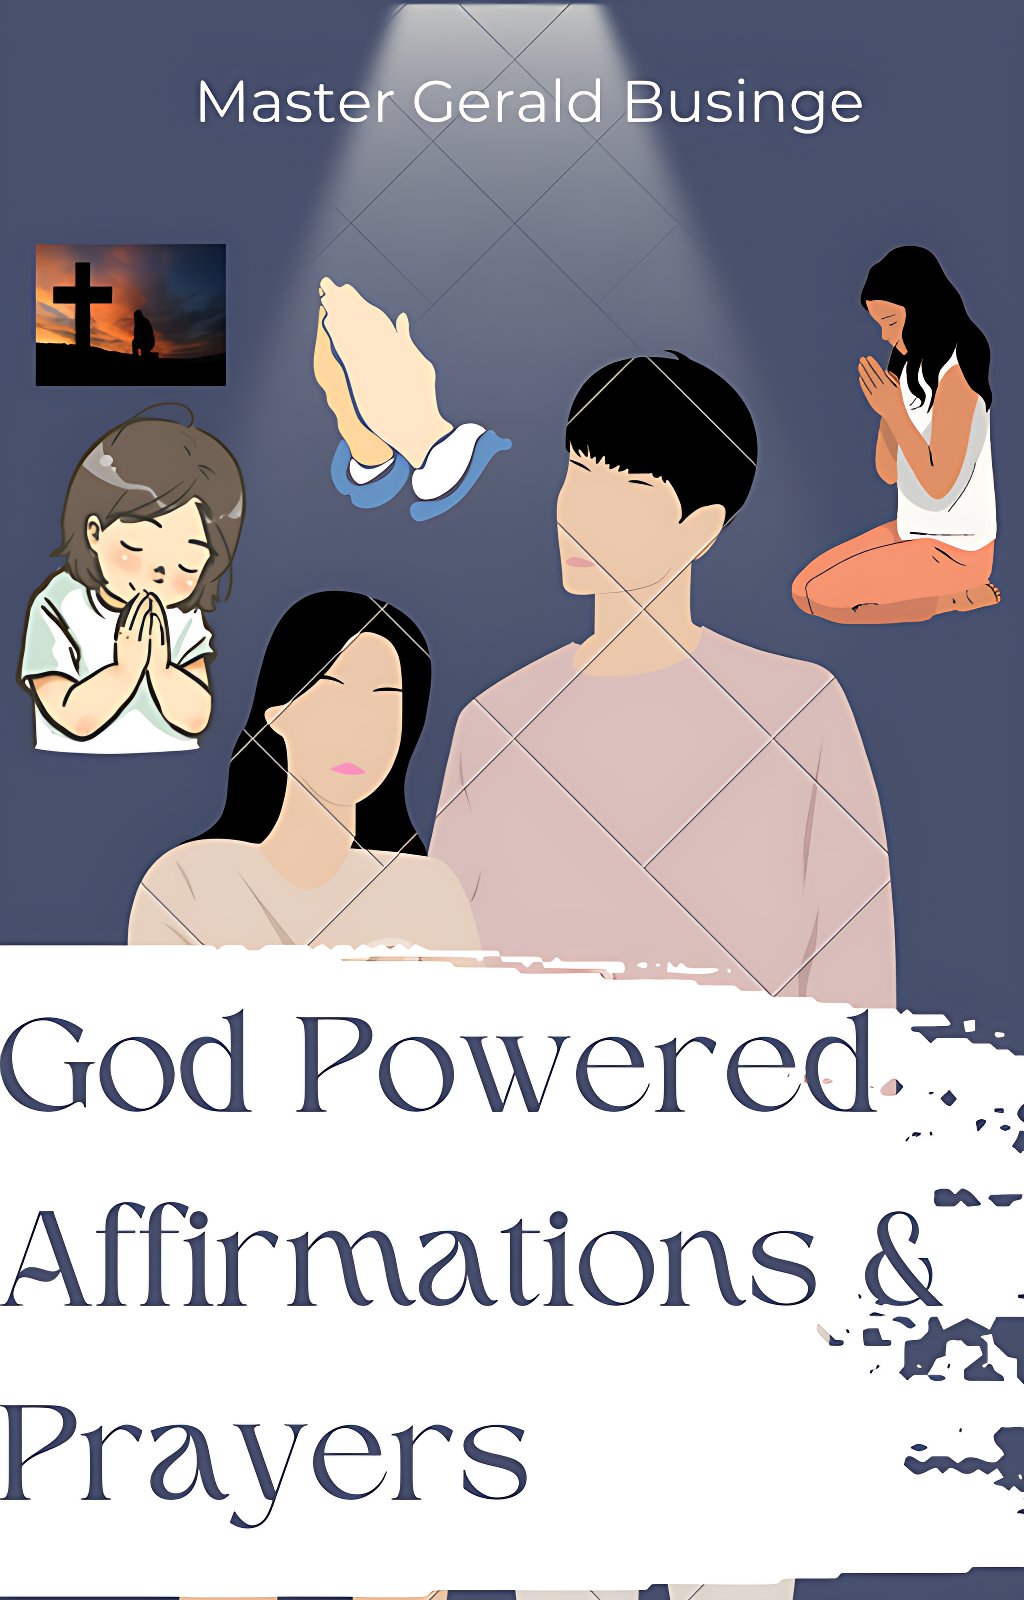 God powered affirmations and prayers2